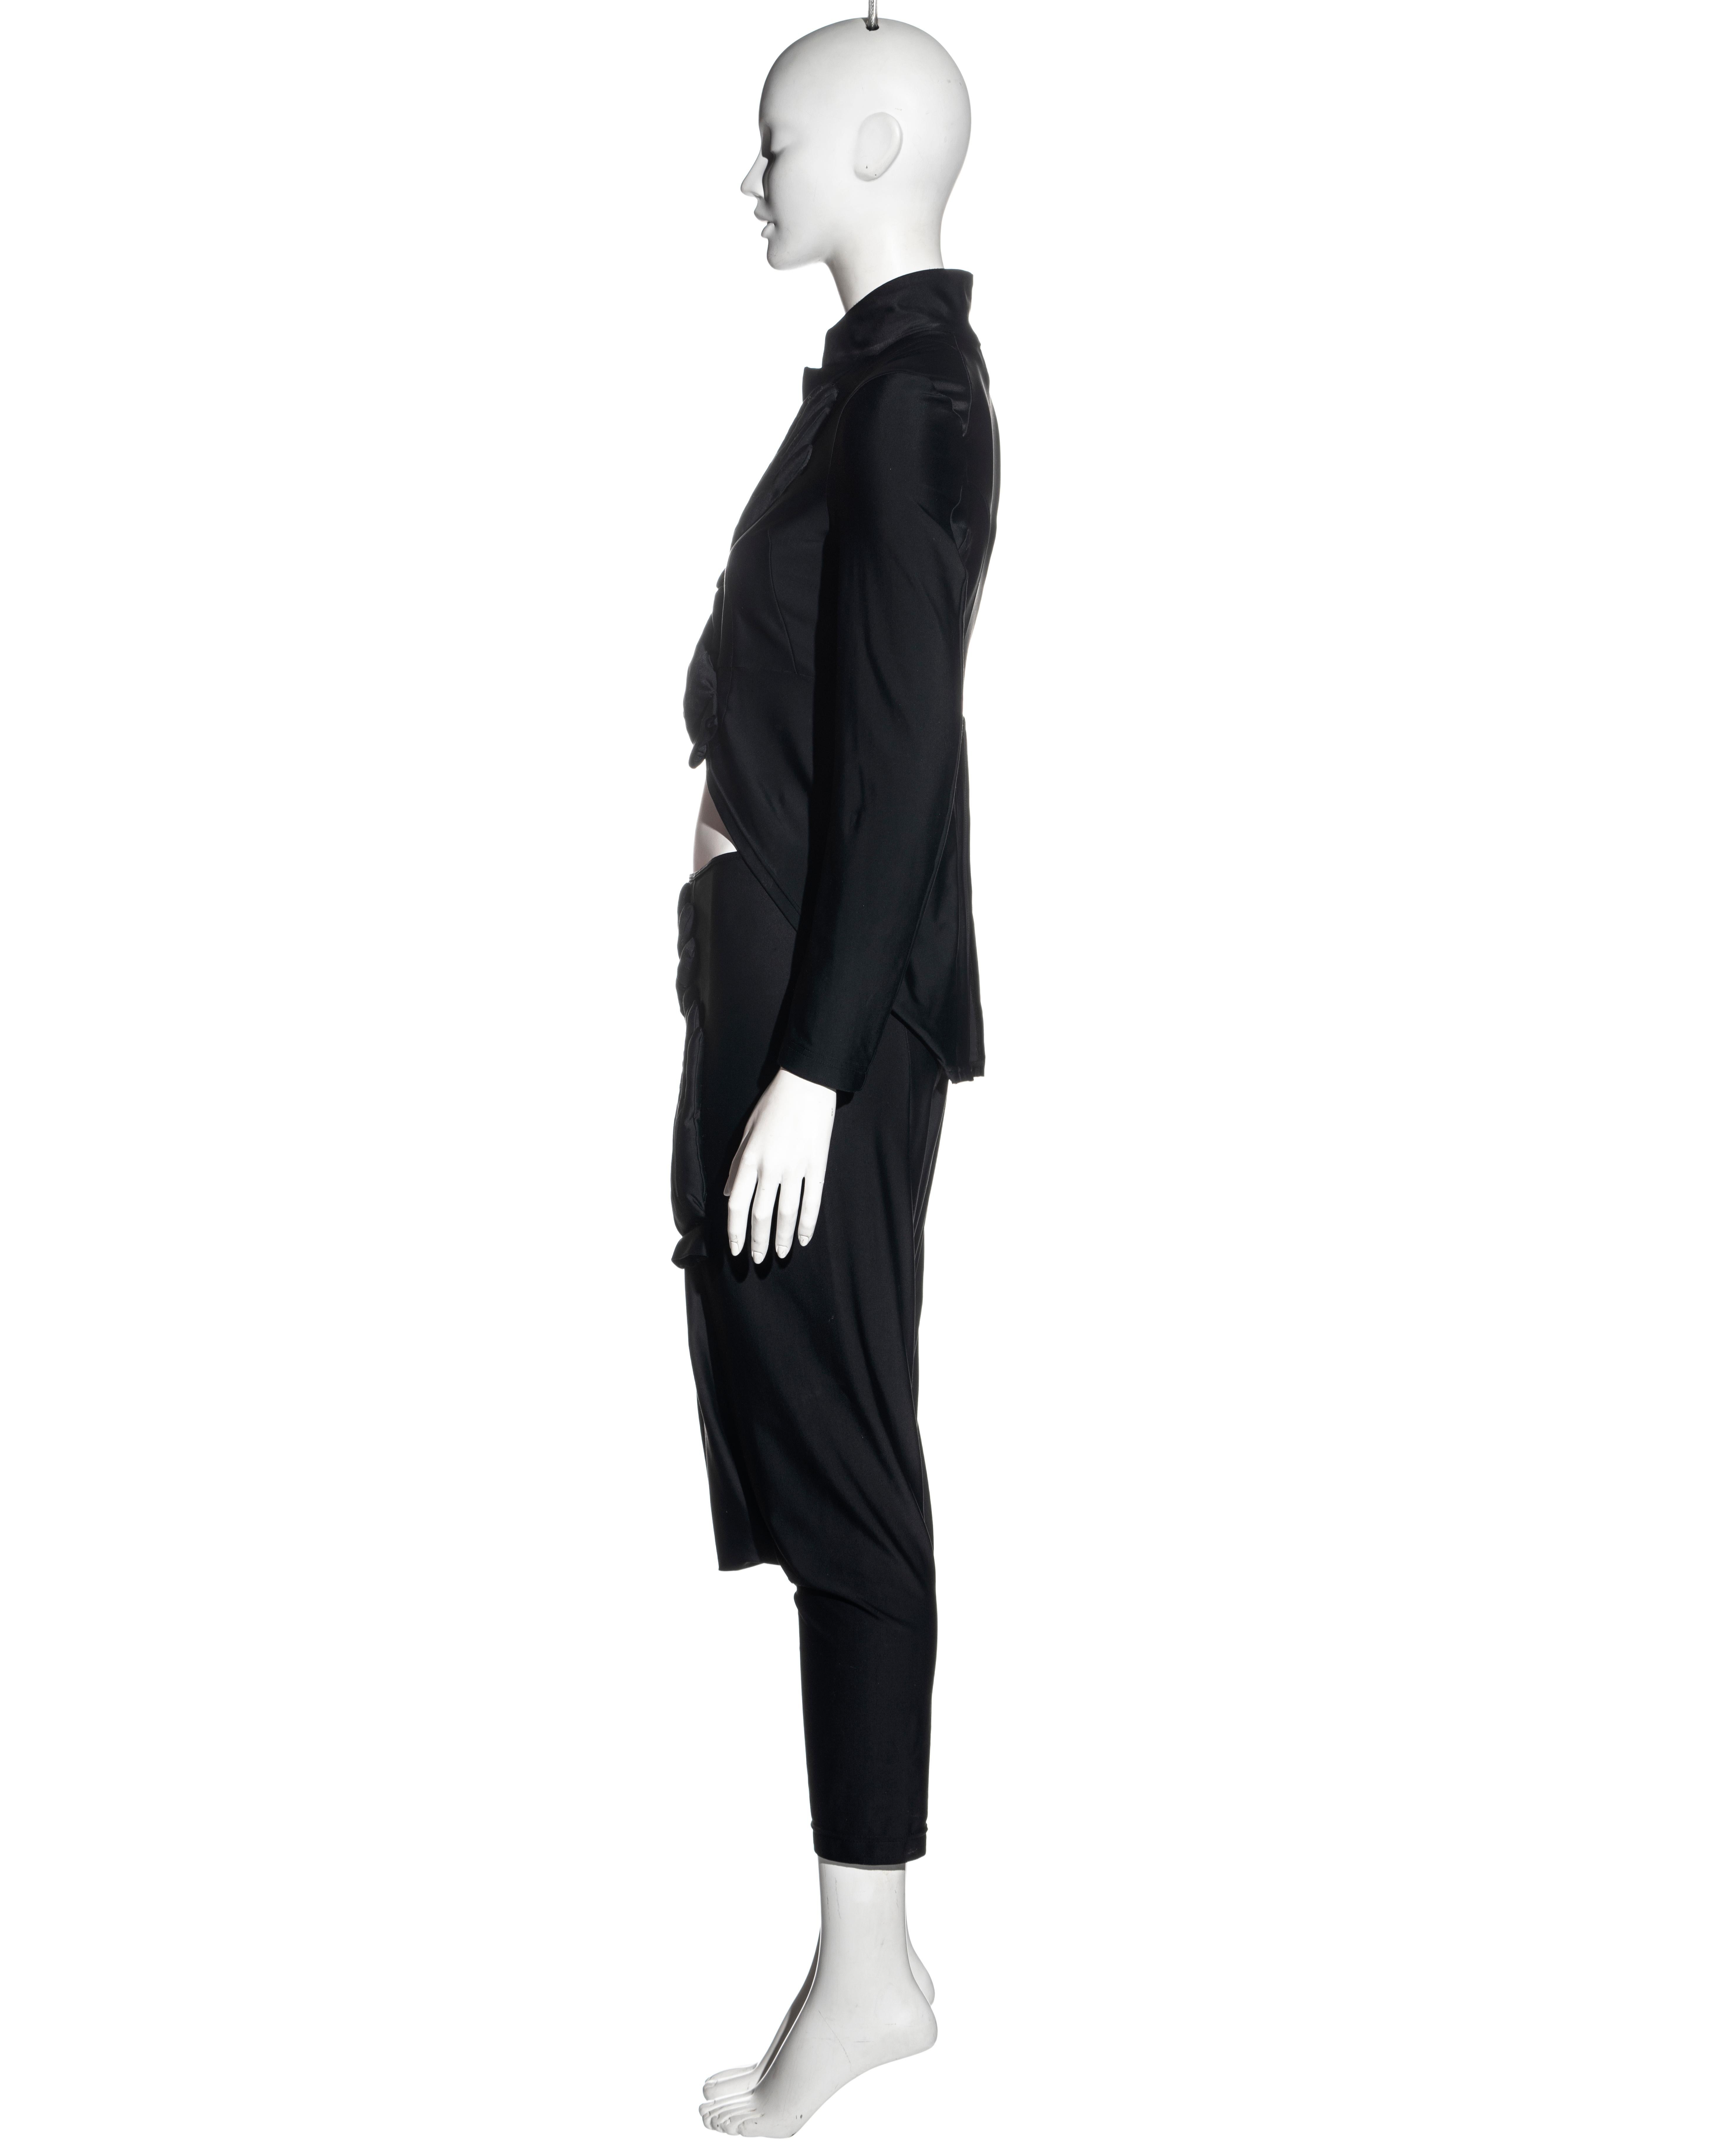 Comme des Garçons black lycra jacket and pants with padded hand motifs, fw 2007 3